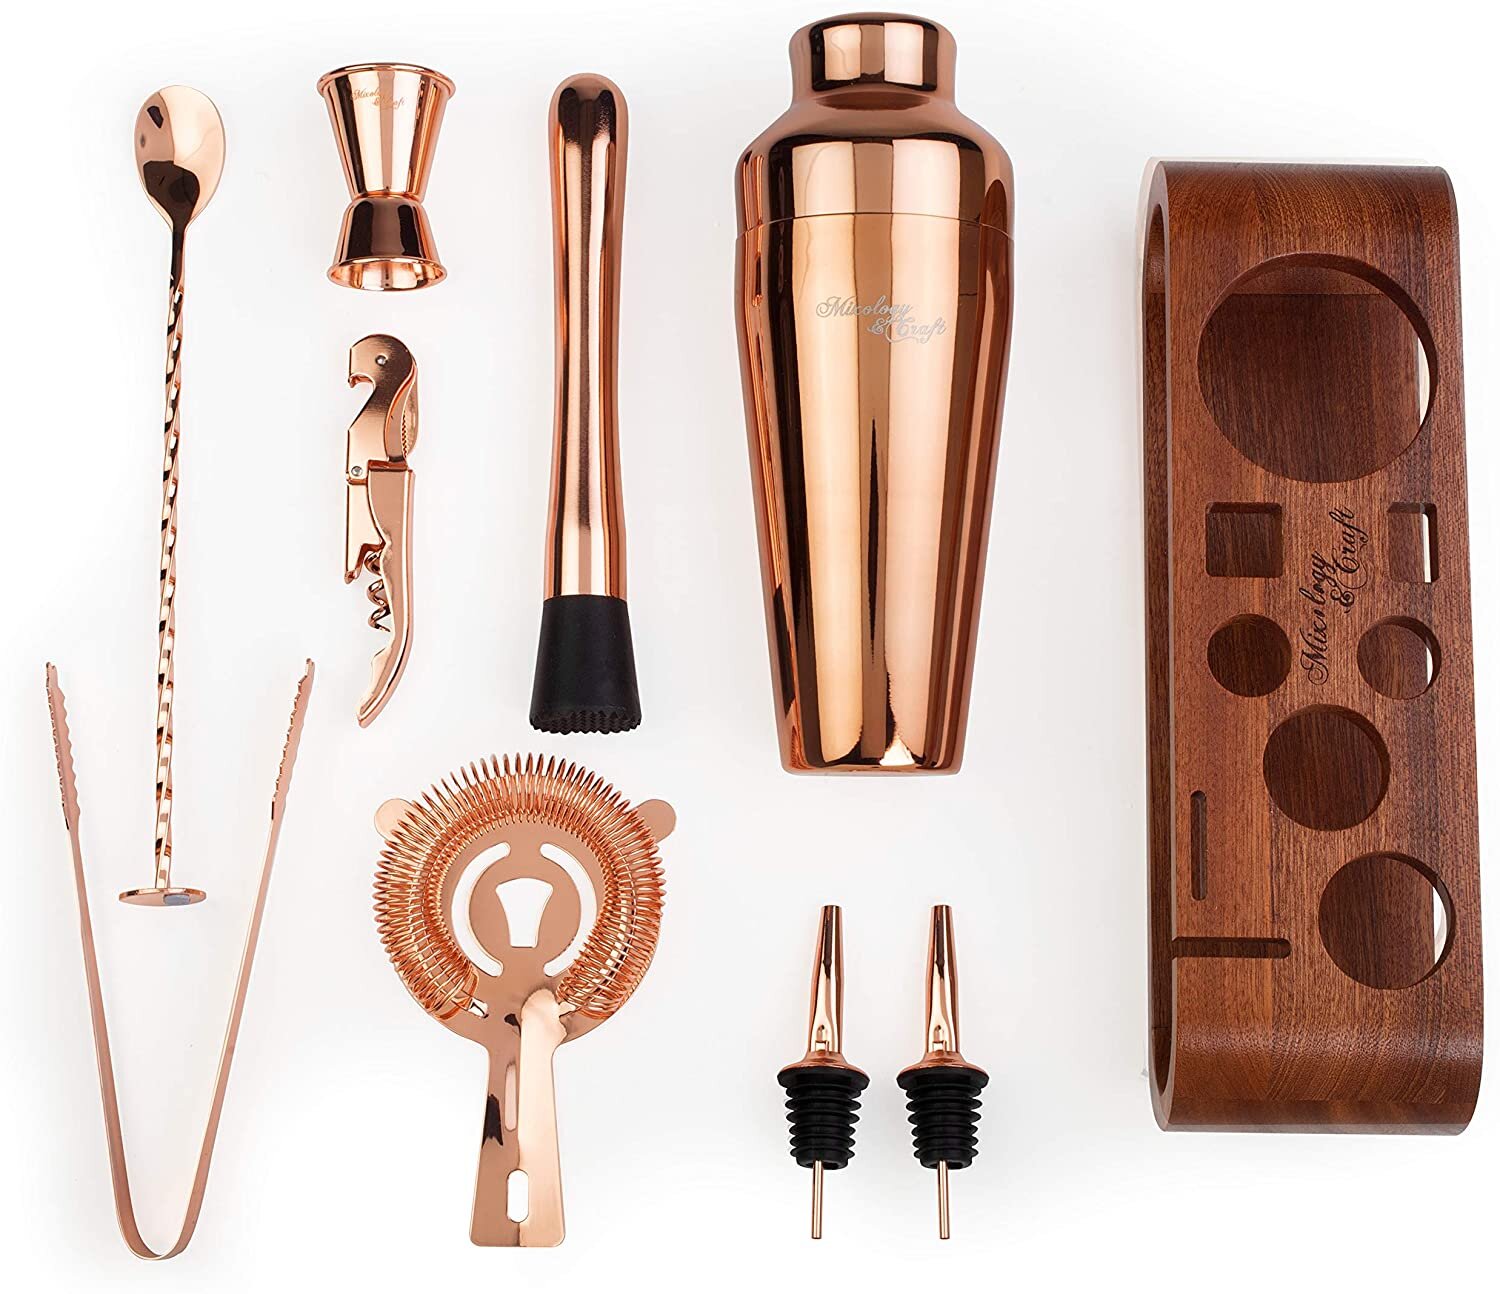 Capacity 9 Set of 500ml Copper Plated 297 Manhattan Style 9pc Copper Plated Stainless Steel Cocktail Set Shaker Barware 